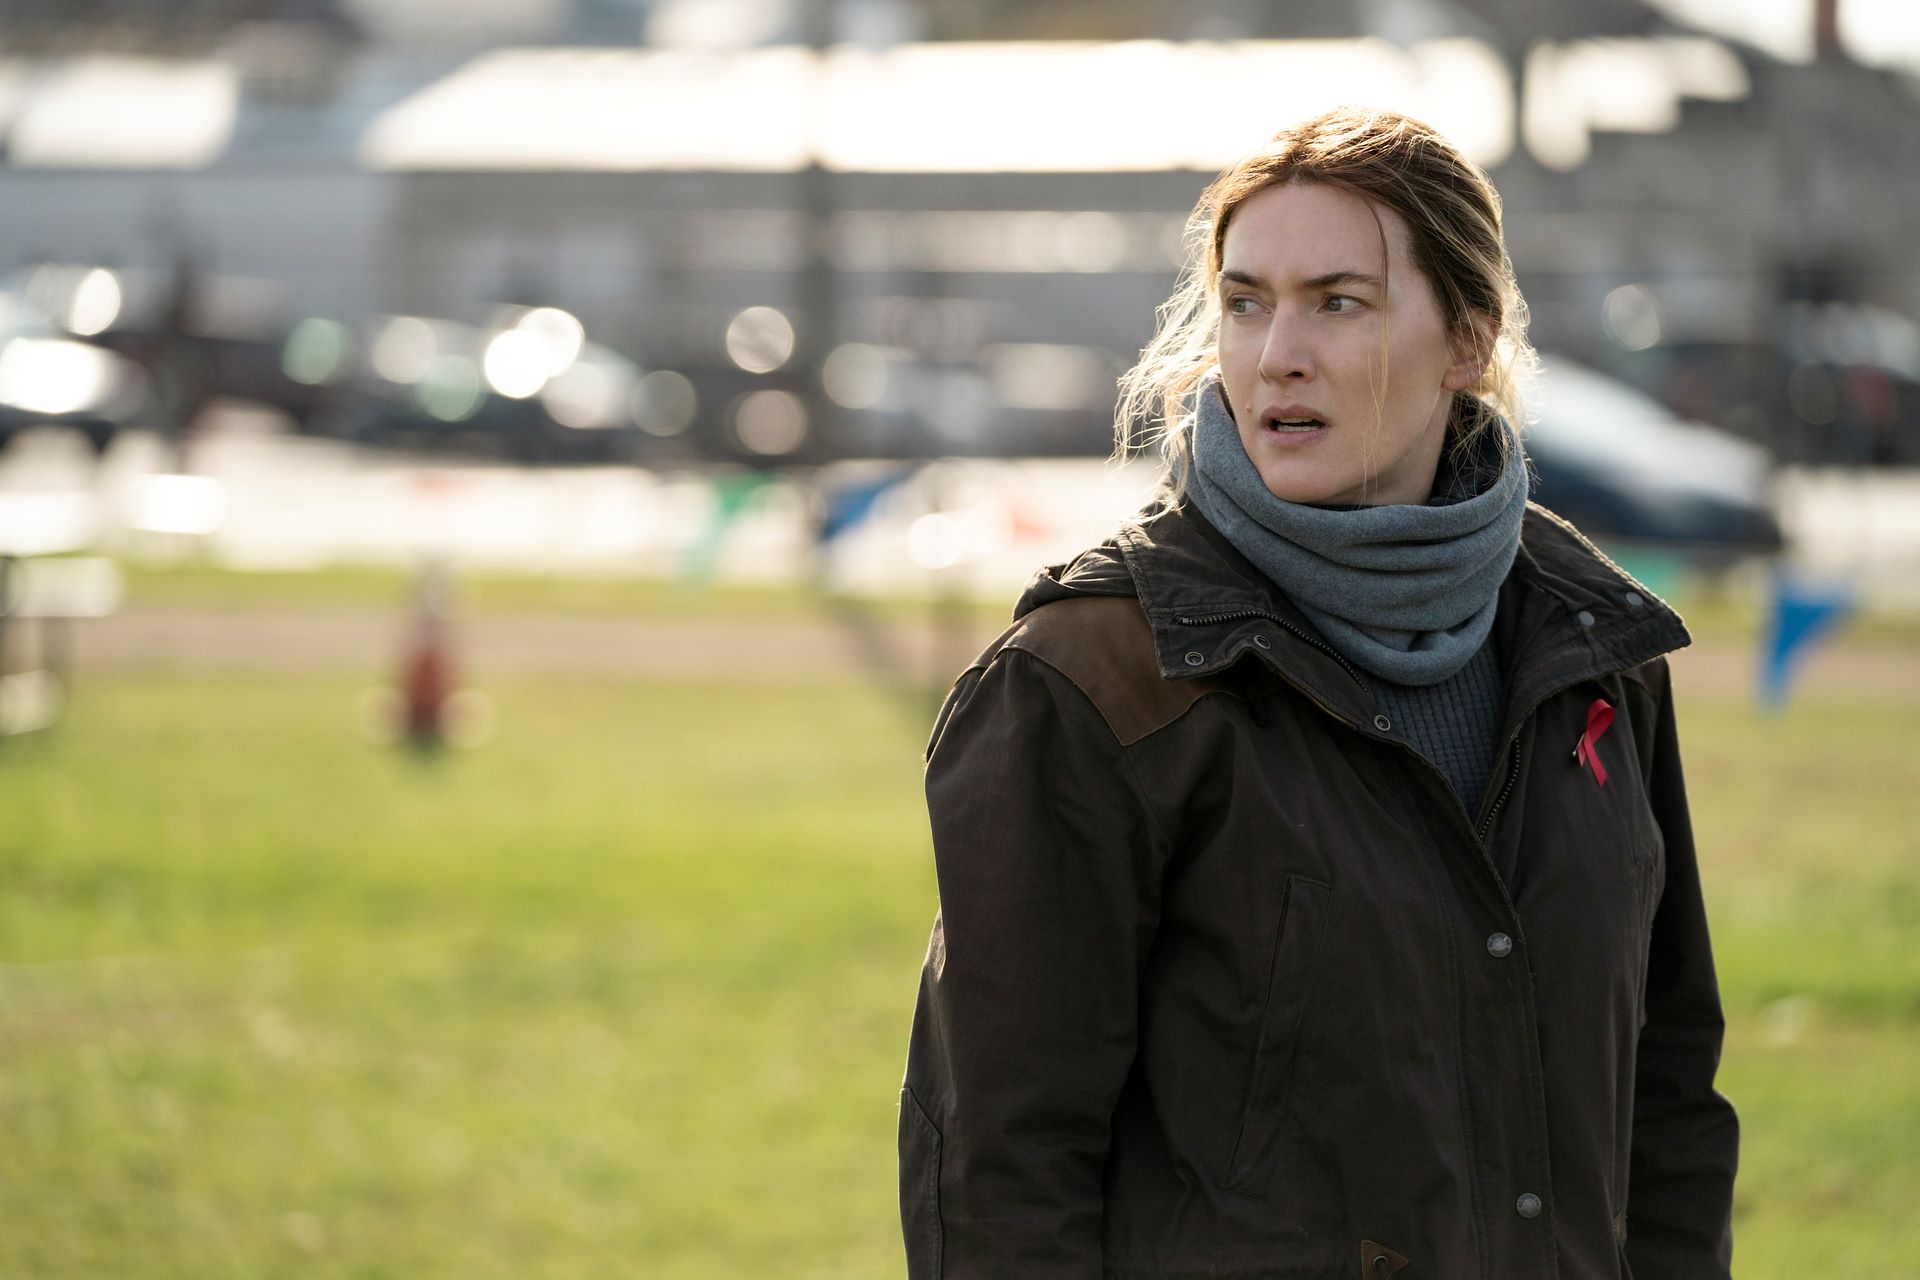 Kate Winslet stands on the grass during a scene from 'Mare of Easttown'